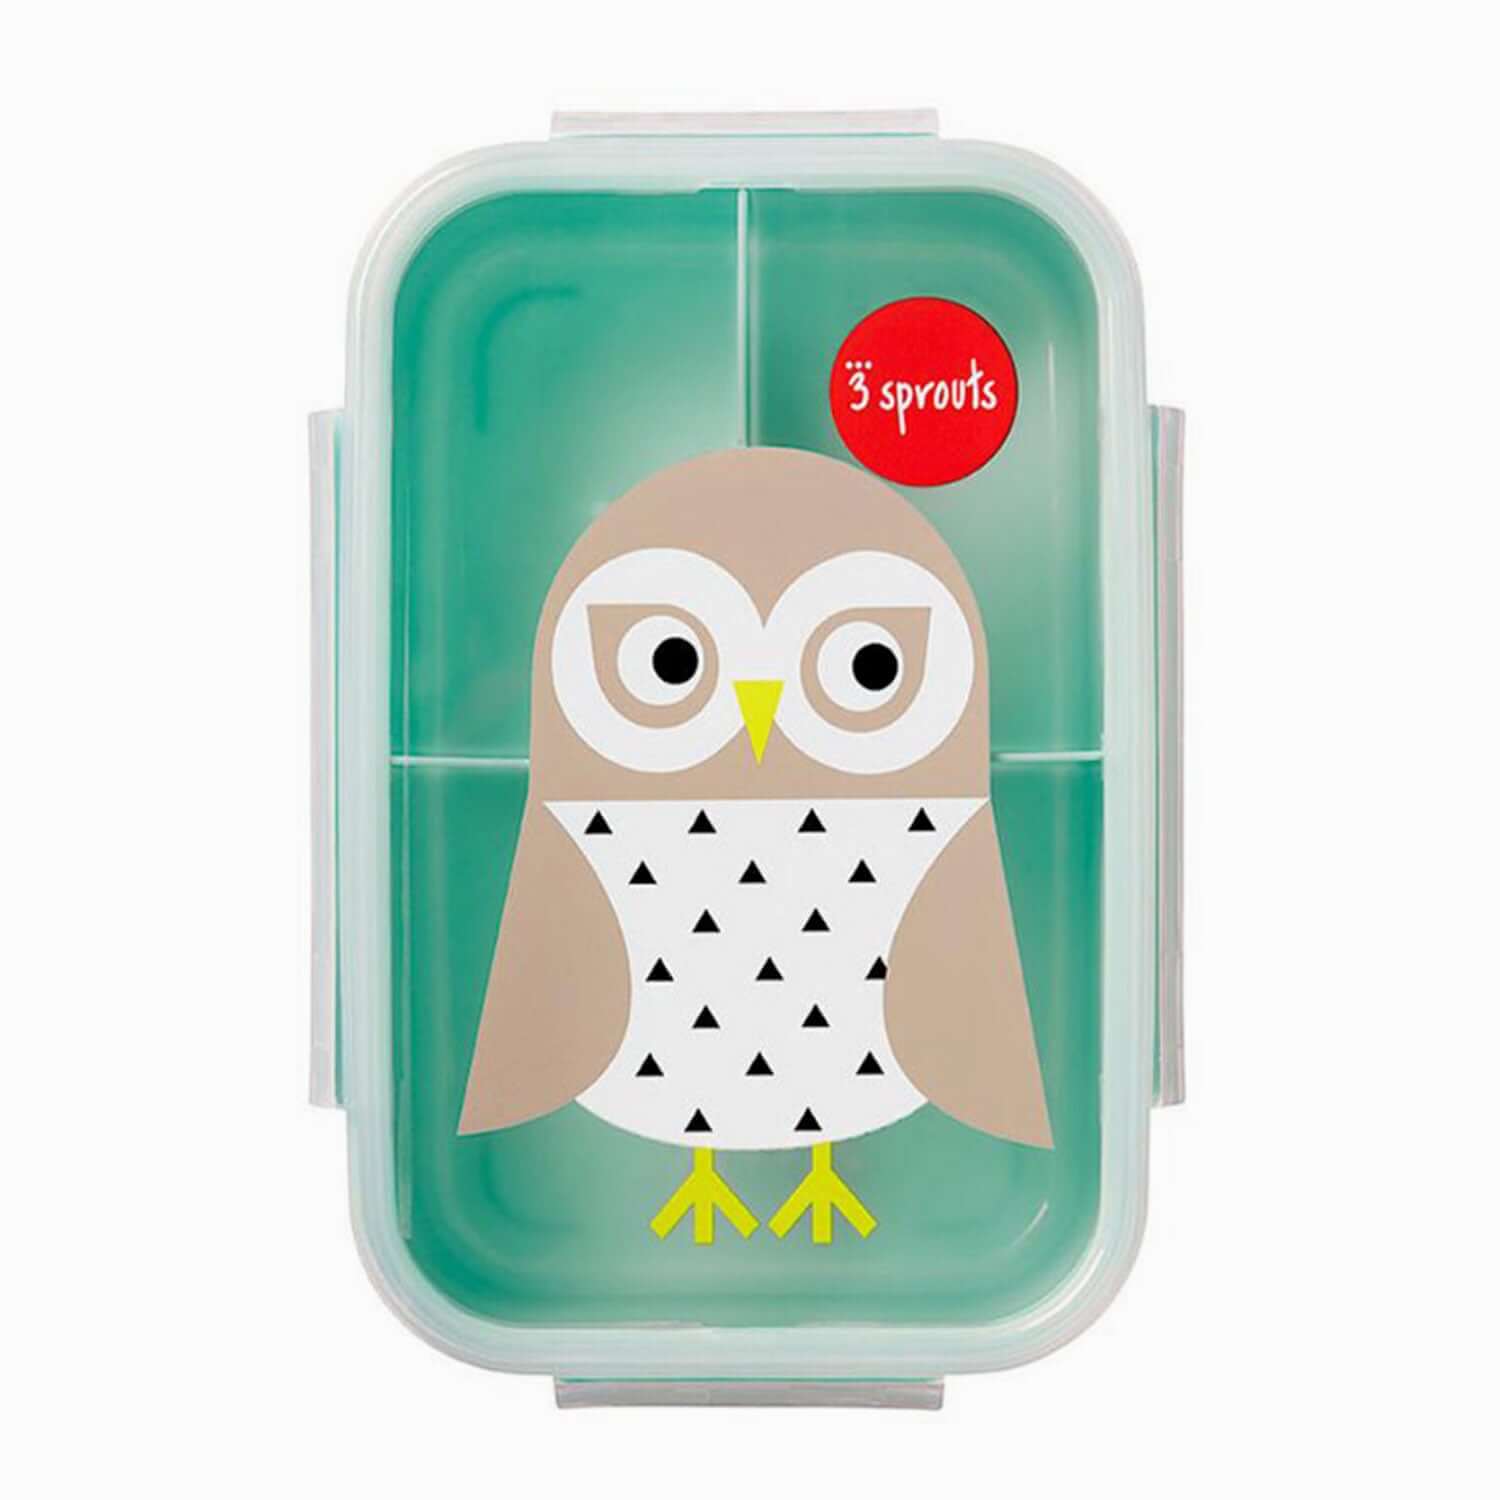 An image of Kid's Lunch Box - Bento Box -Owl | 3 Sprouts